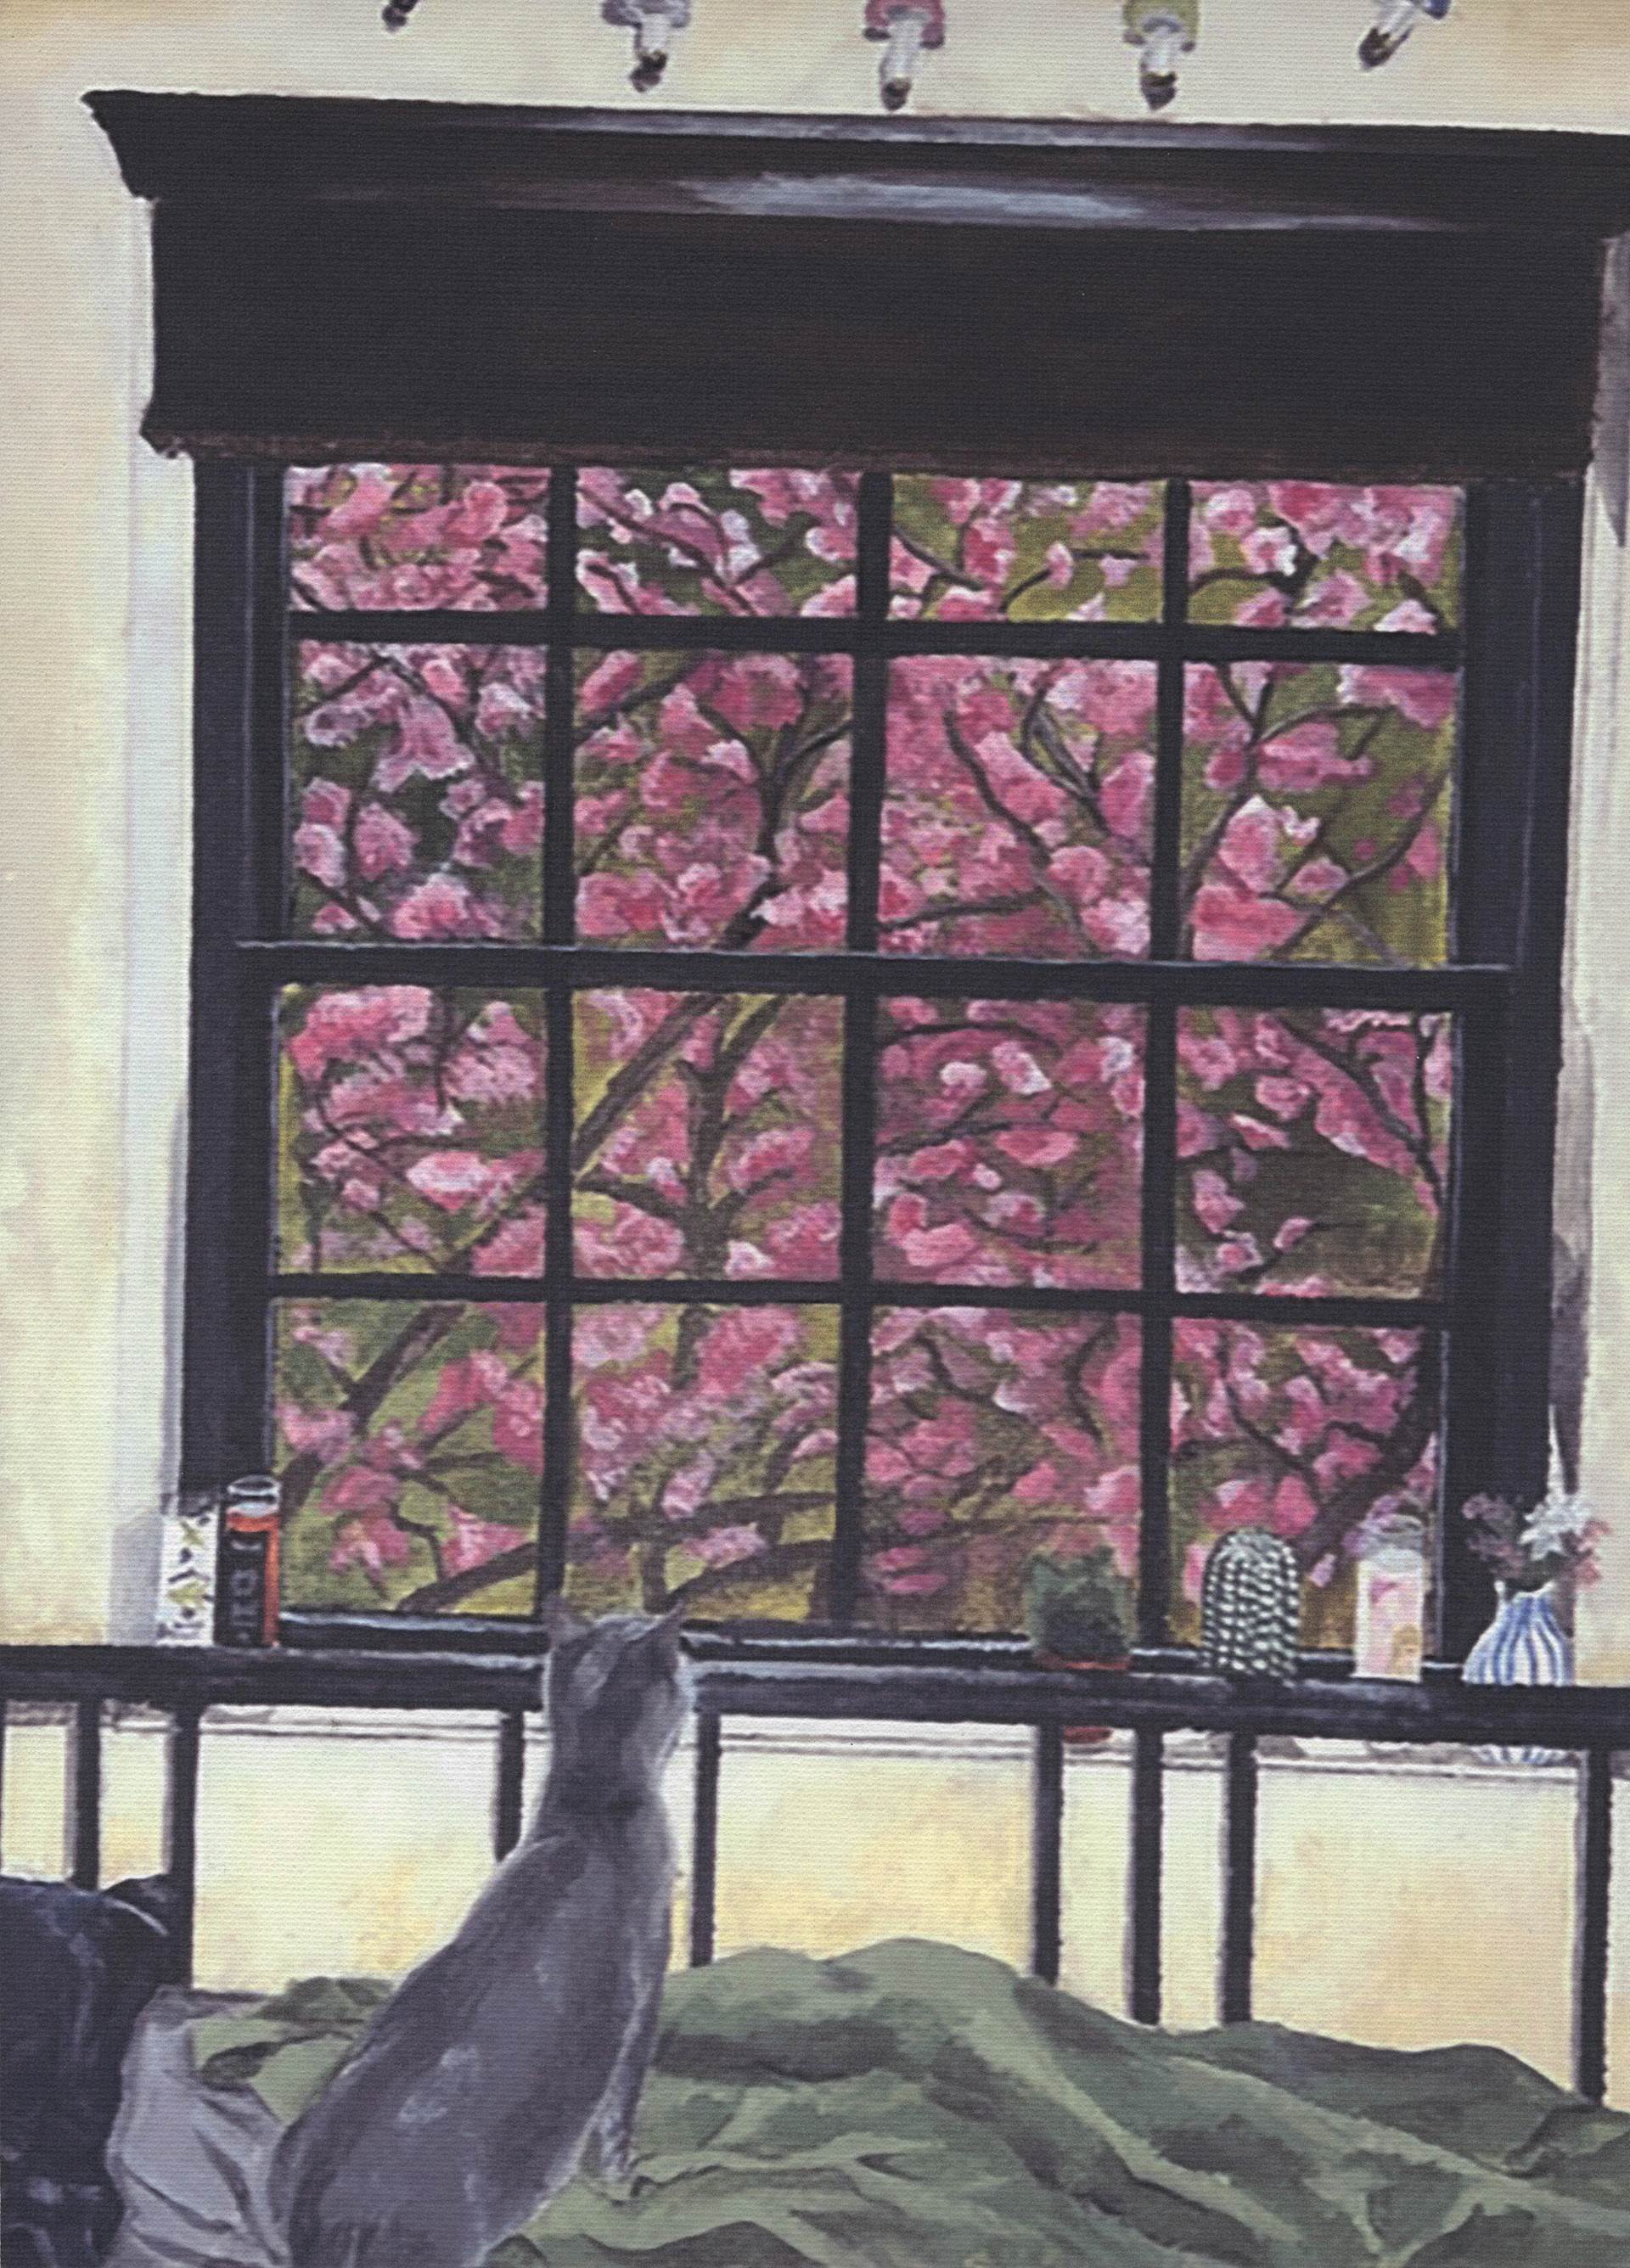 Painting of cat sitting on bed looking out a window at a cherry blossom tree